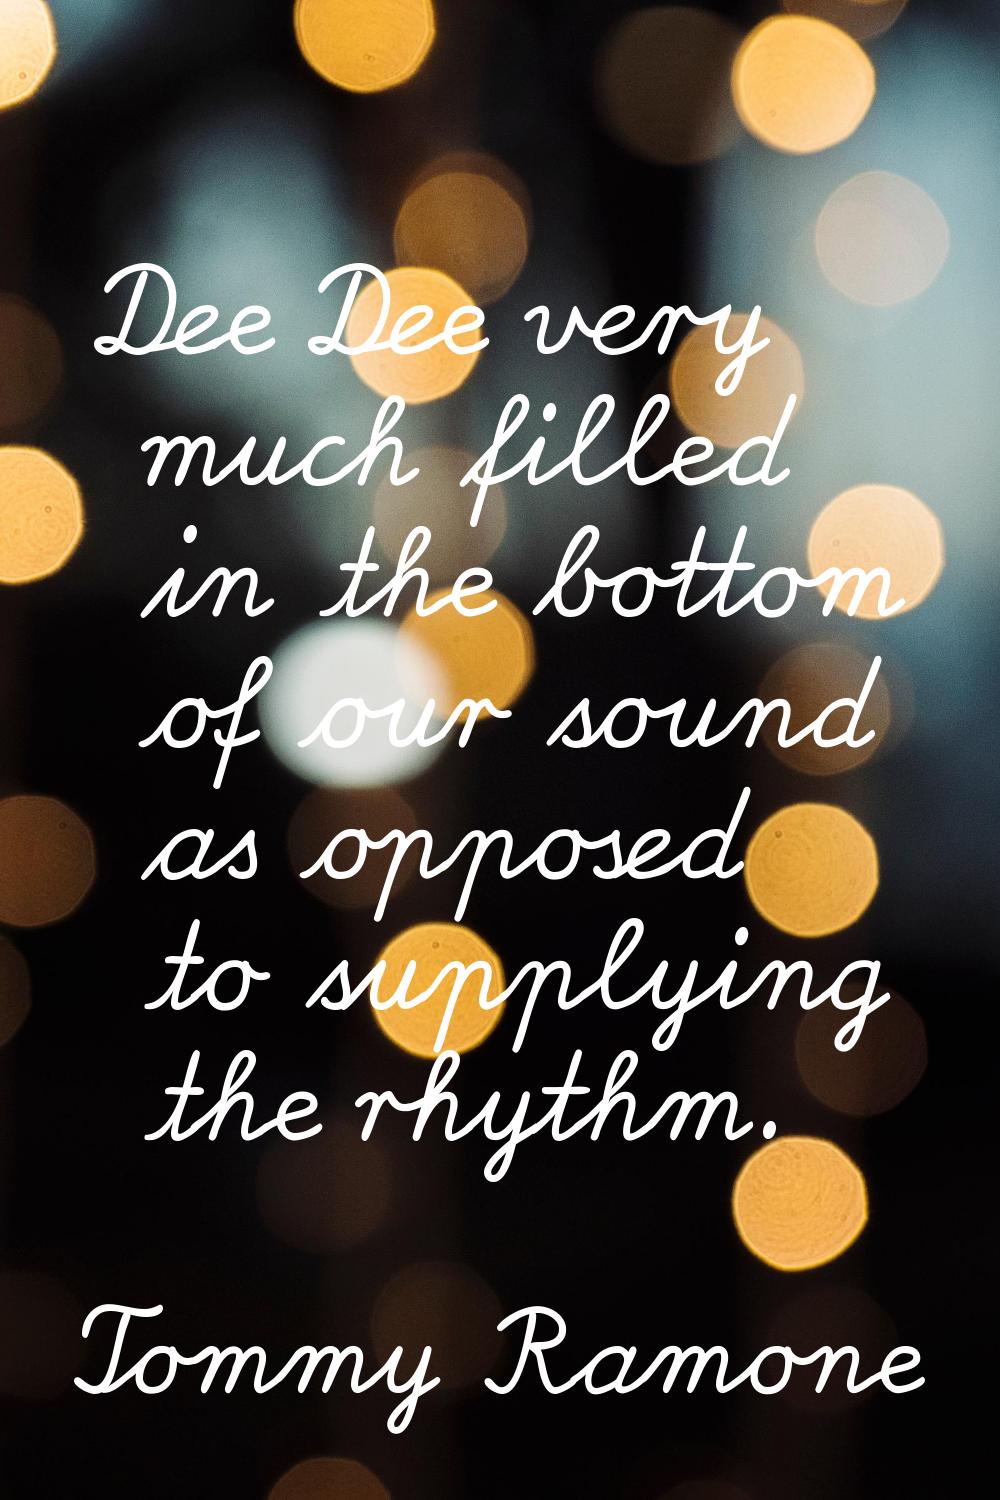 Dee Dee very much filled in the bottom of our sound as opposed to supplying the rhythm.